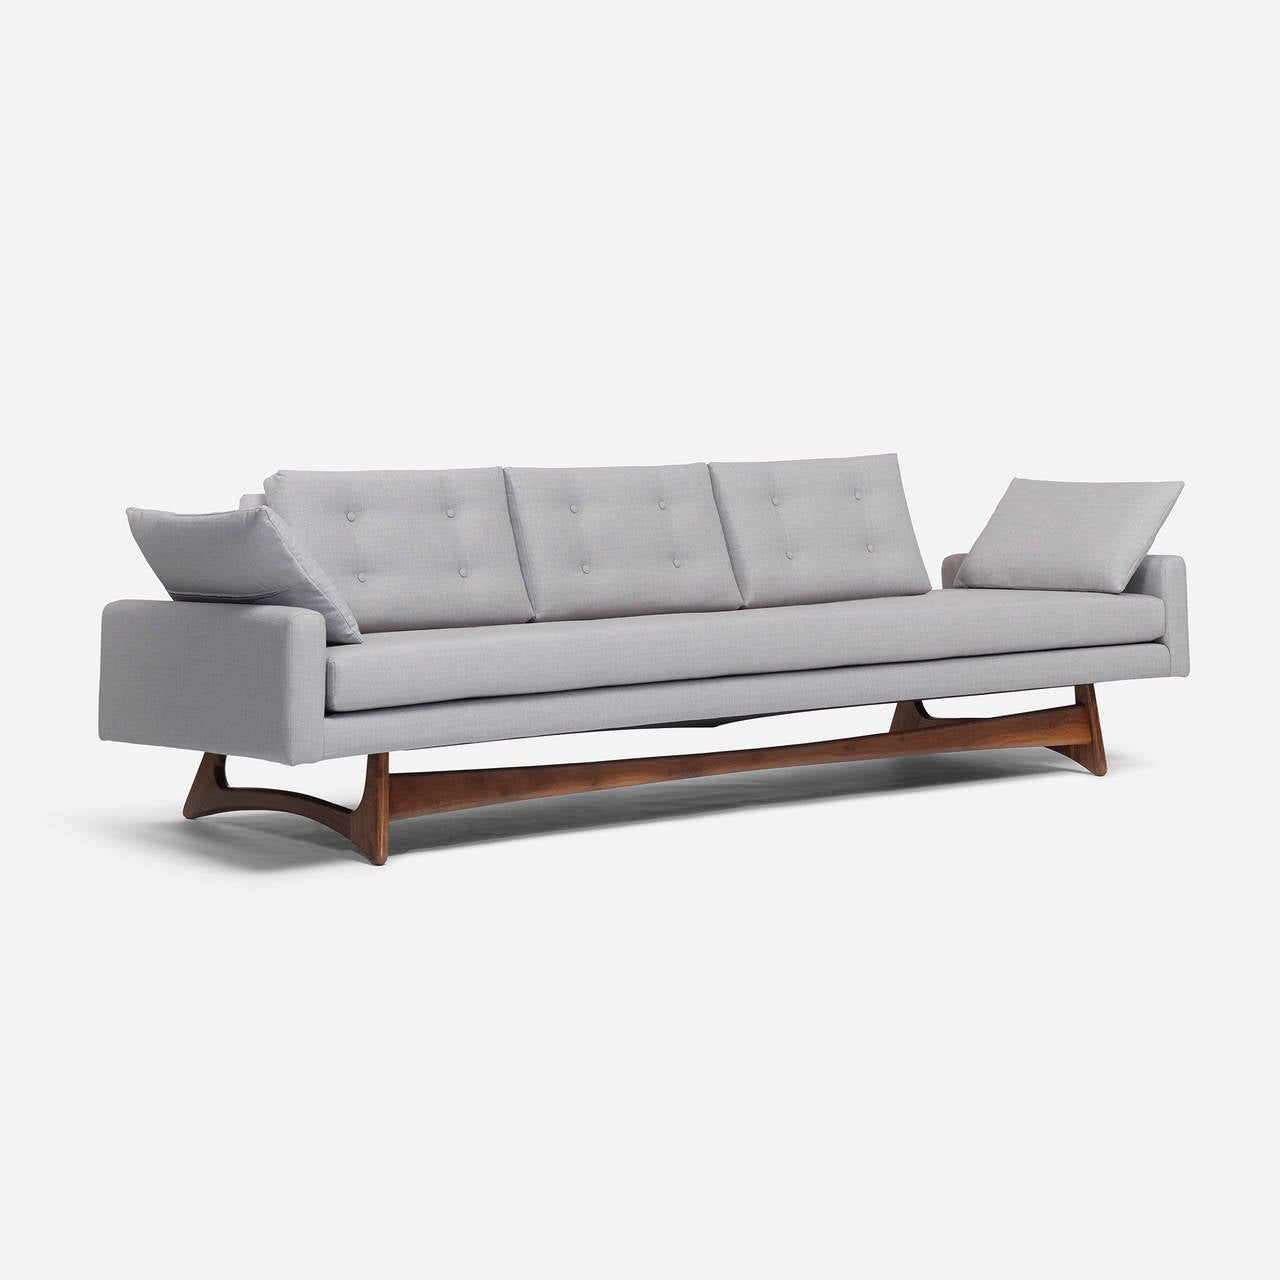 American Sofa, Model 2408 by Adrian Pearsall for Craft Associates